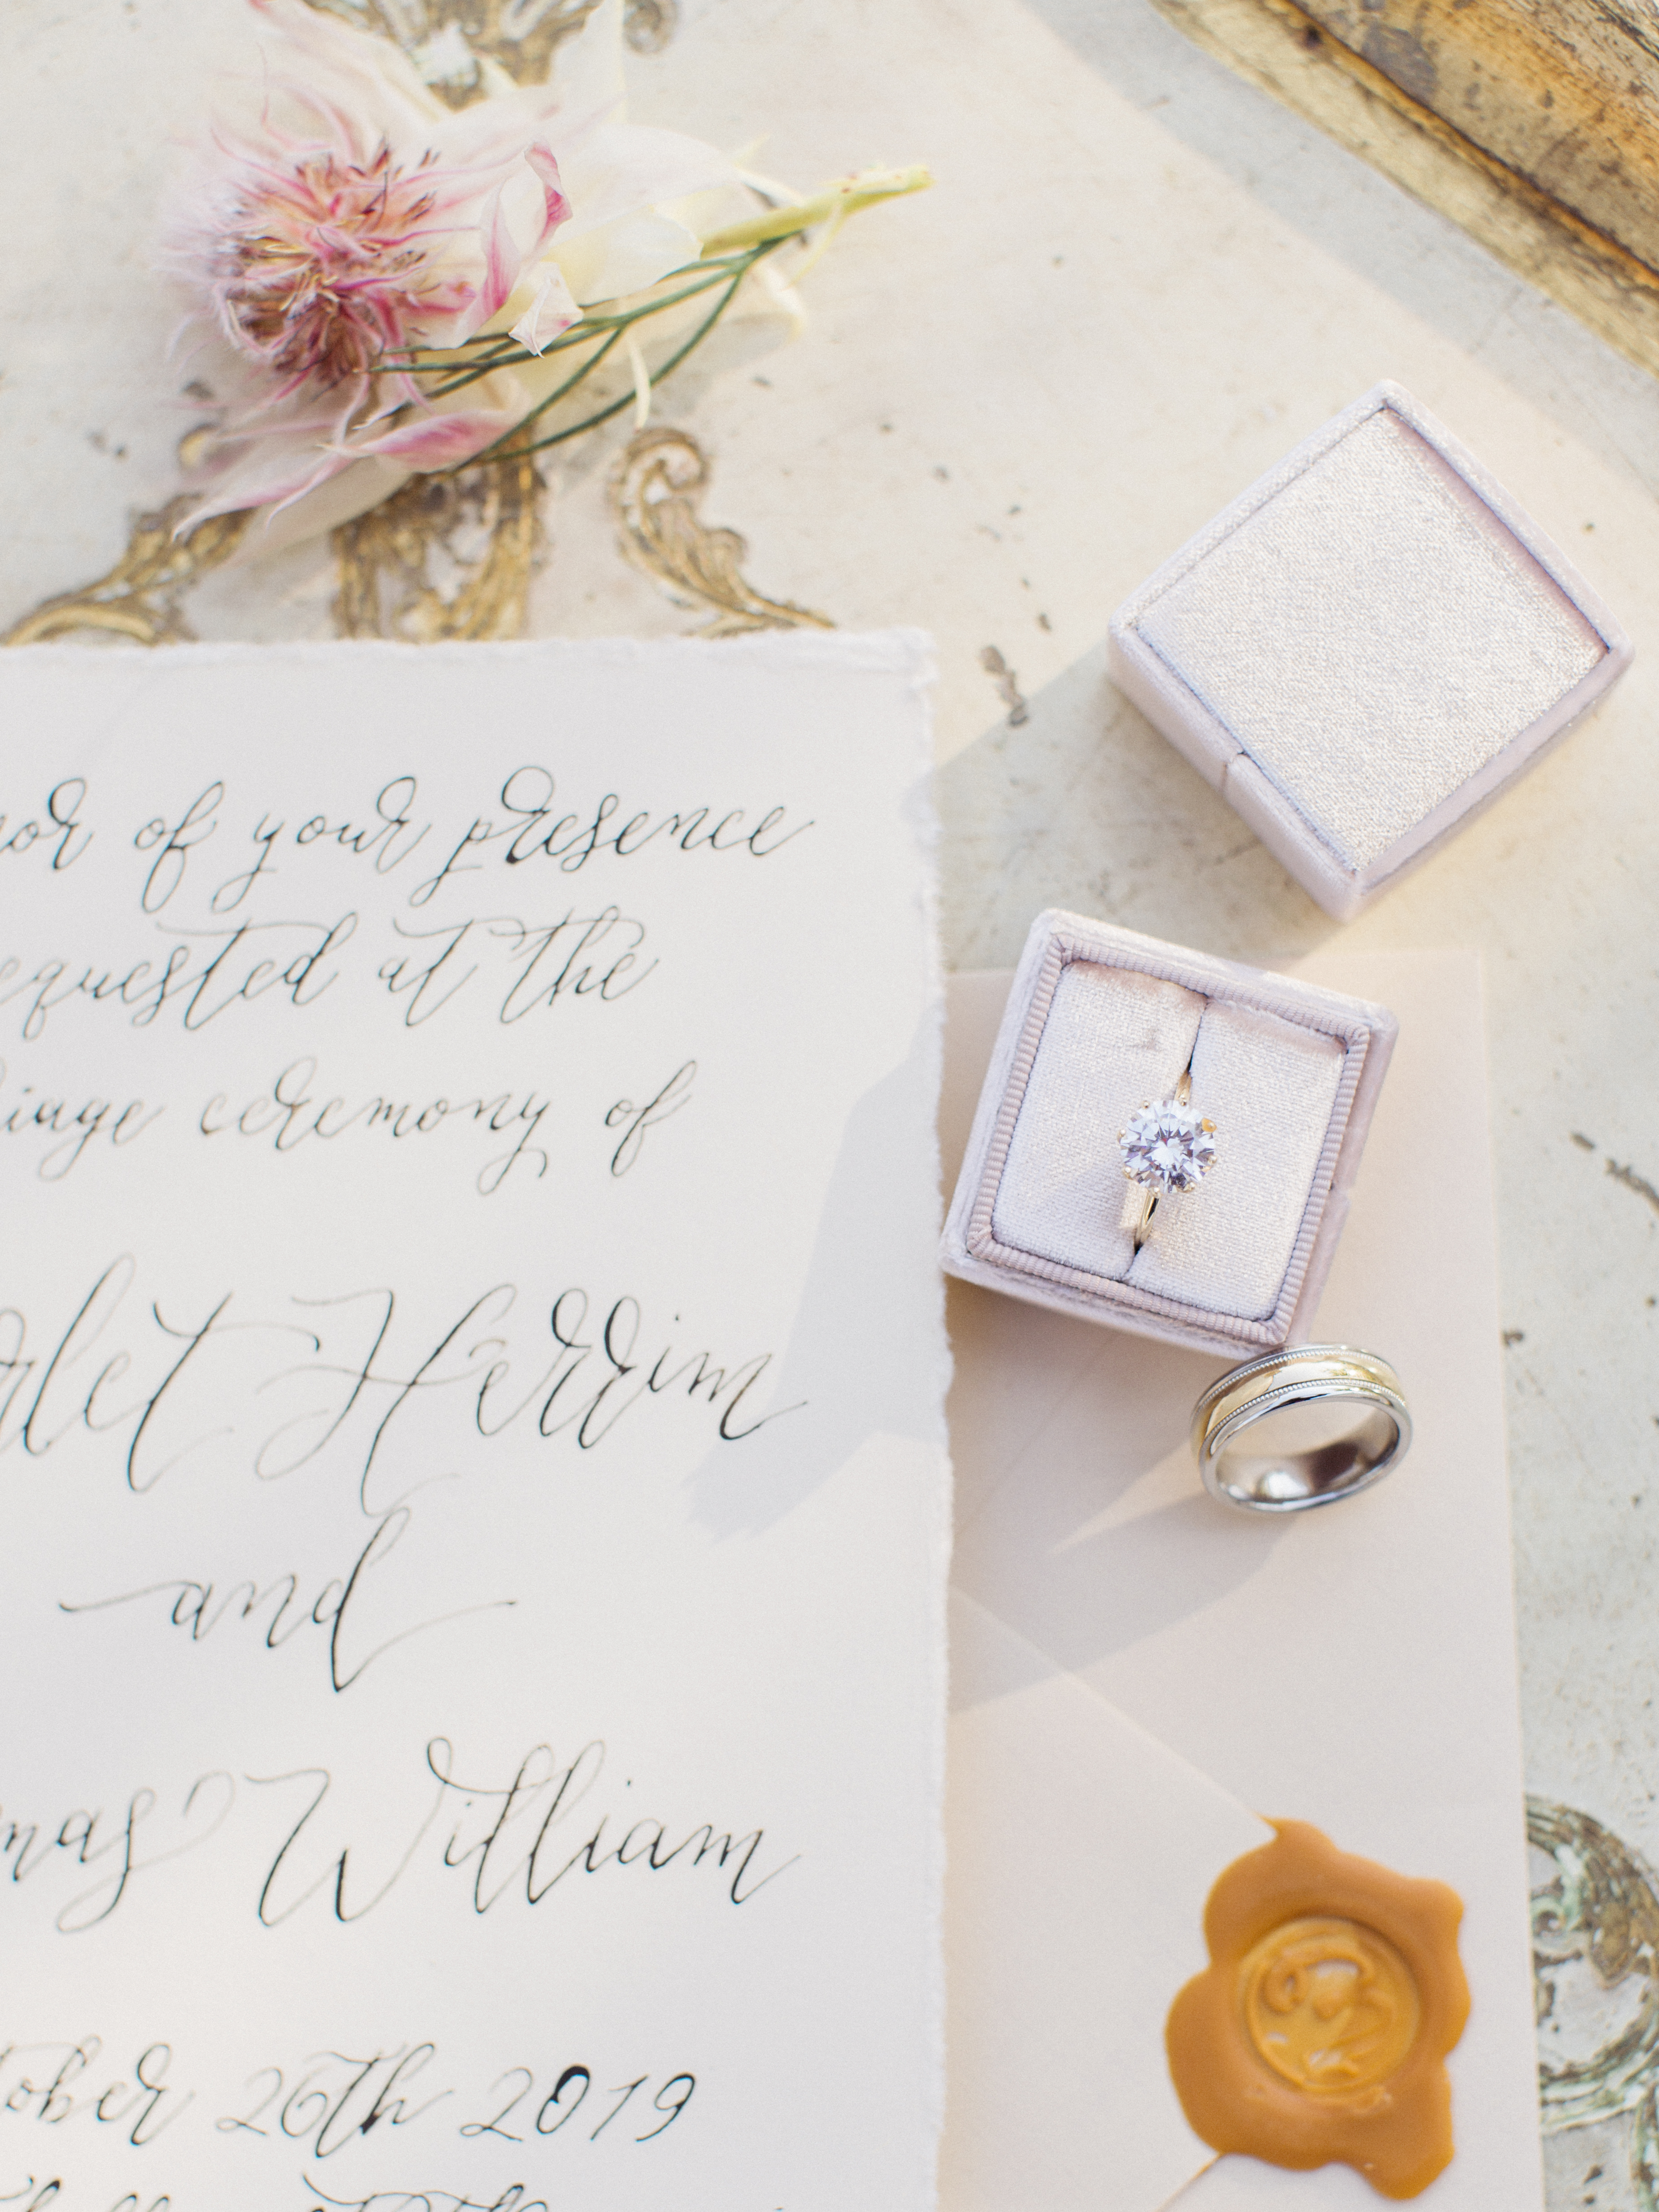 Handwritten Wedding Invitations by The Ink Cafe with Lauren Priori jewelery photographed by Love Tree Studios.